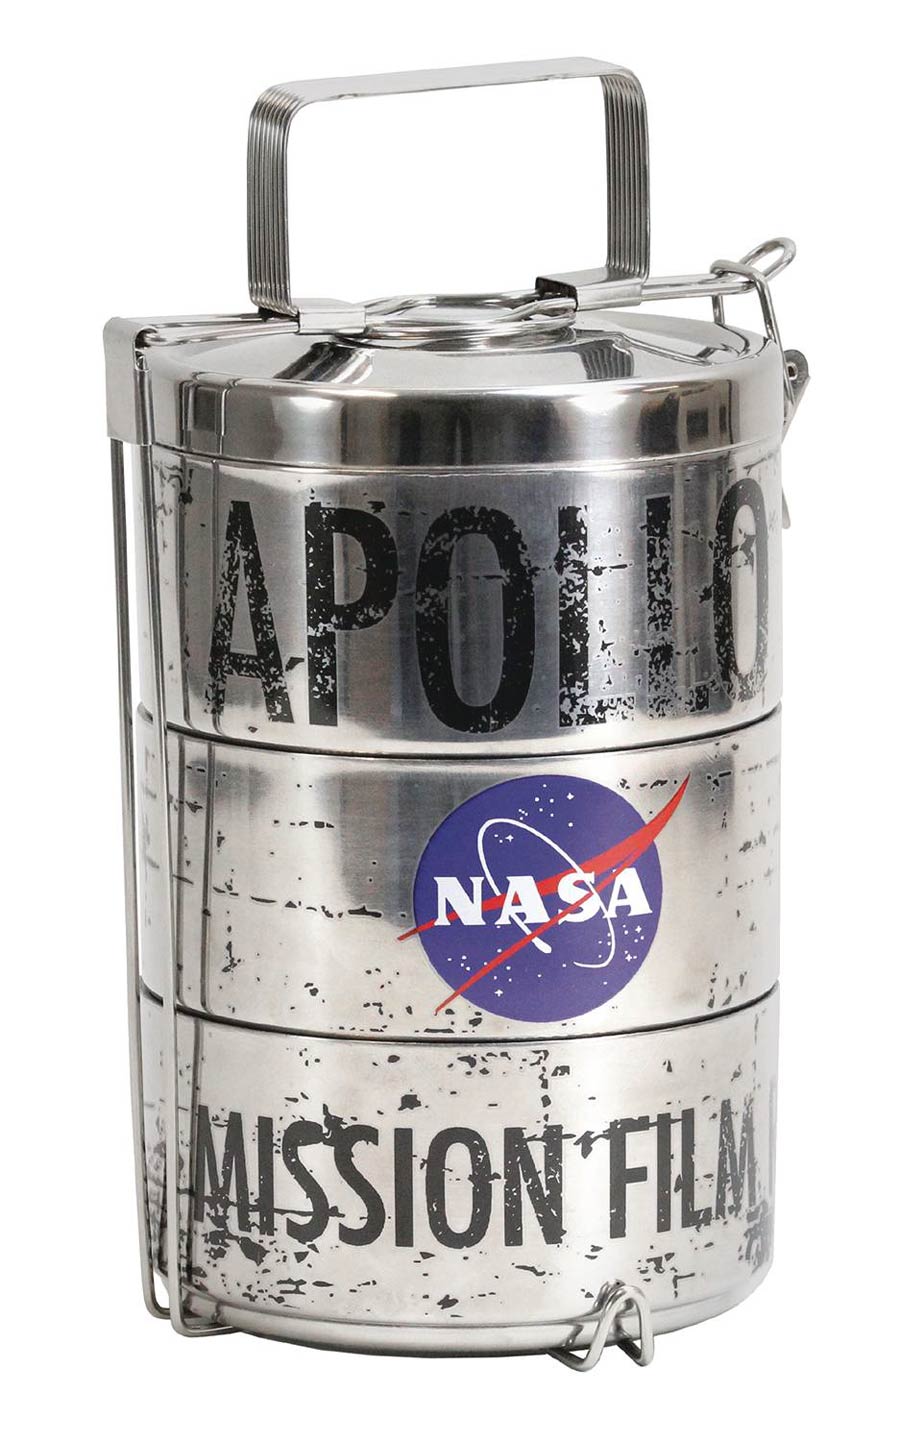 NASA Apollo Moon Landing Film Canister Lunch Tins